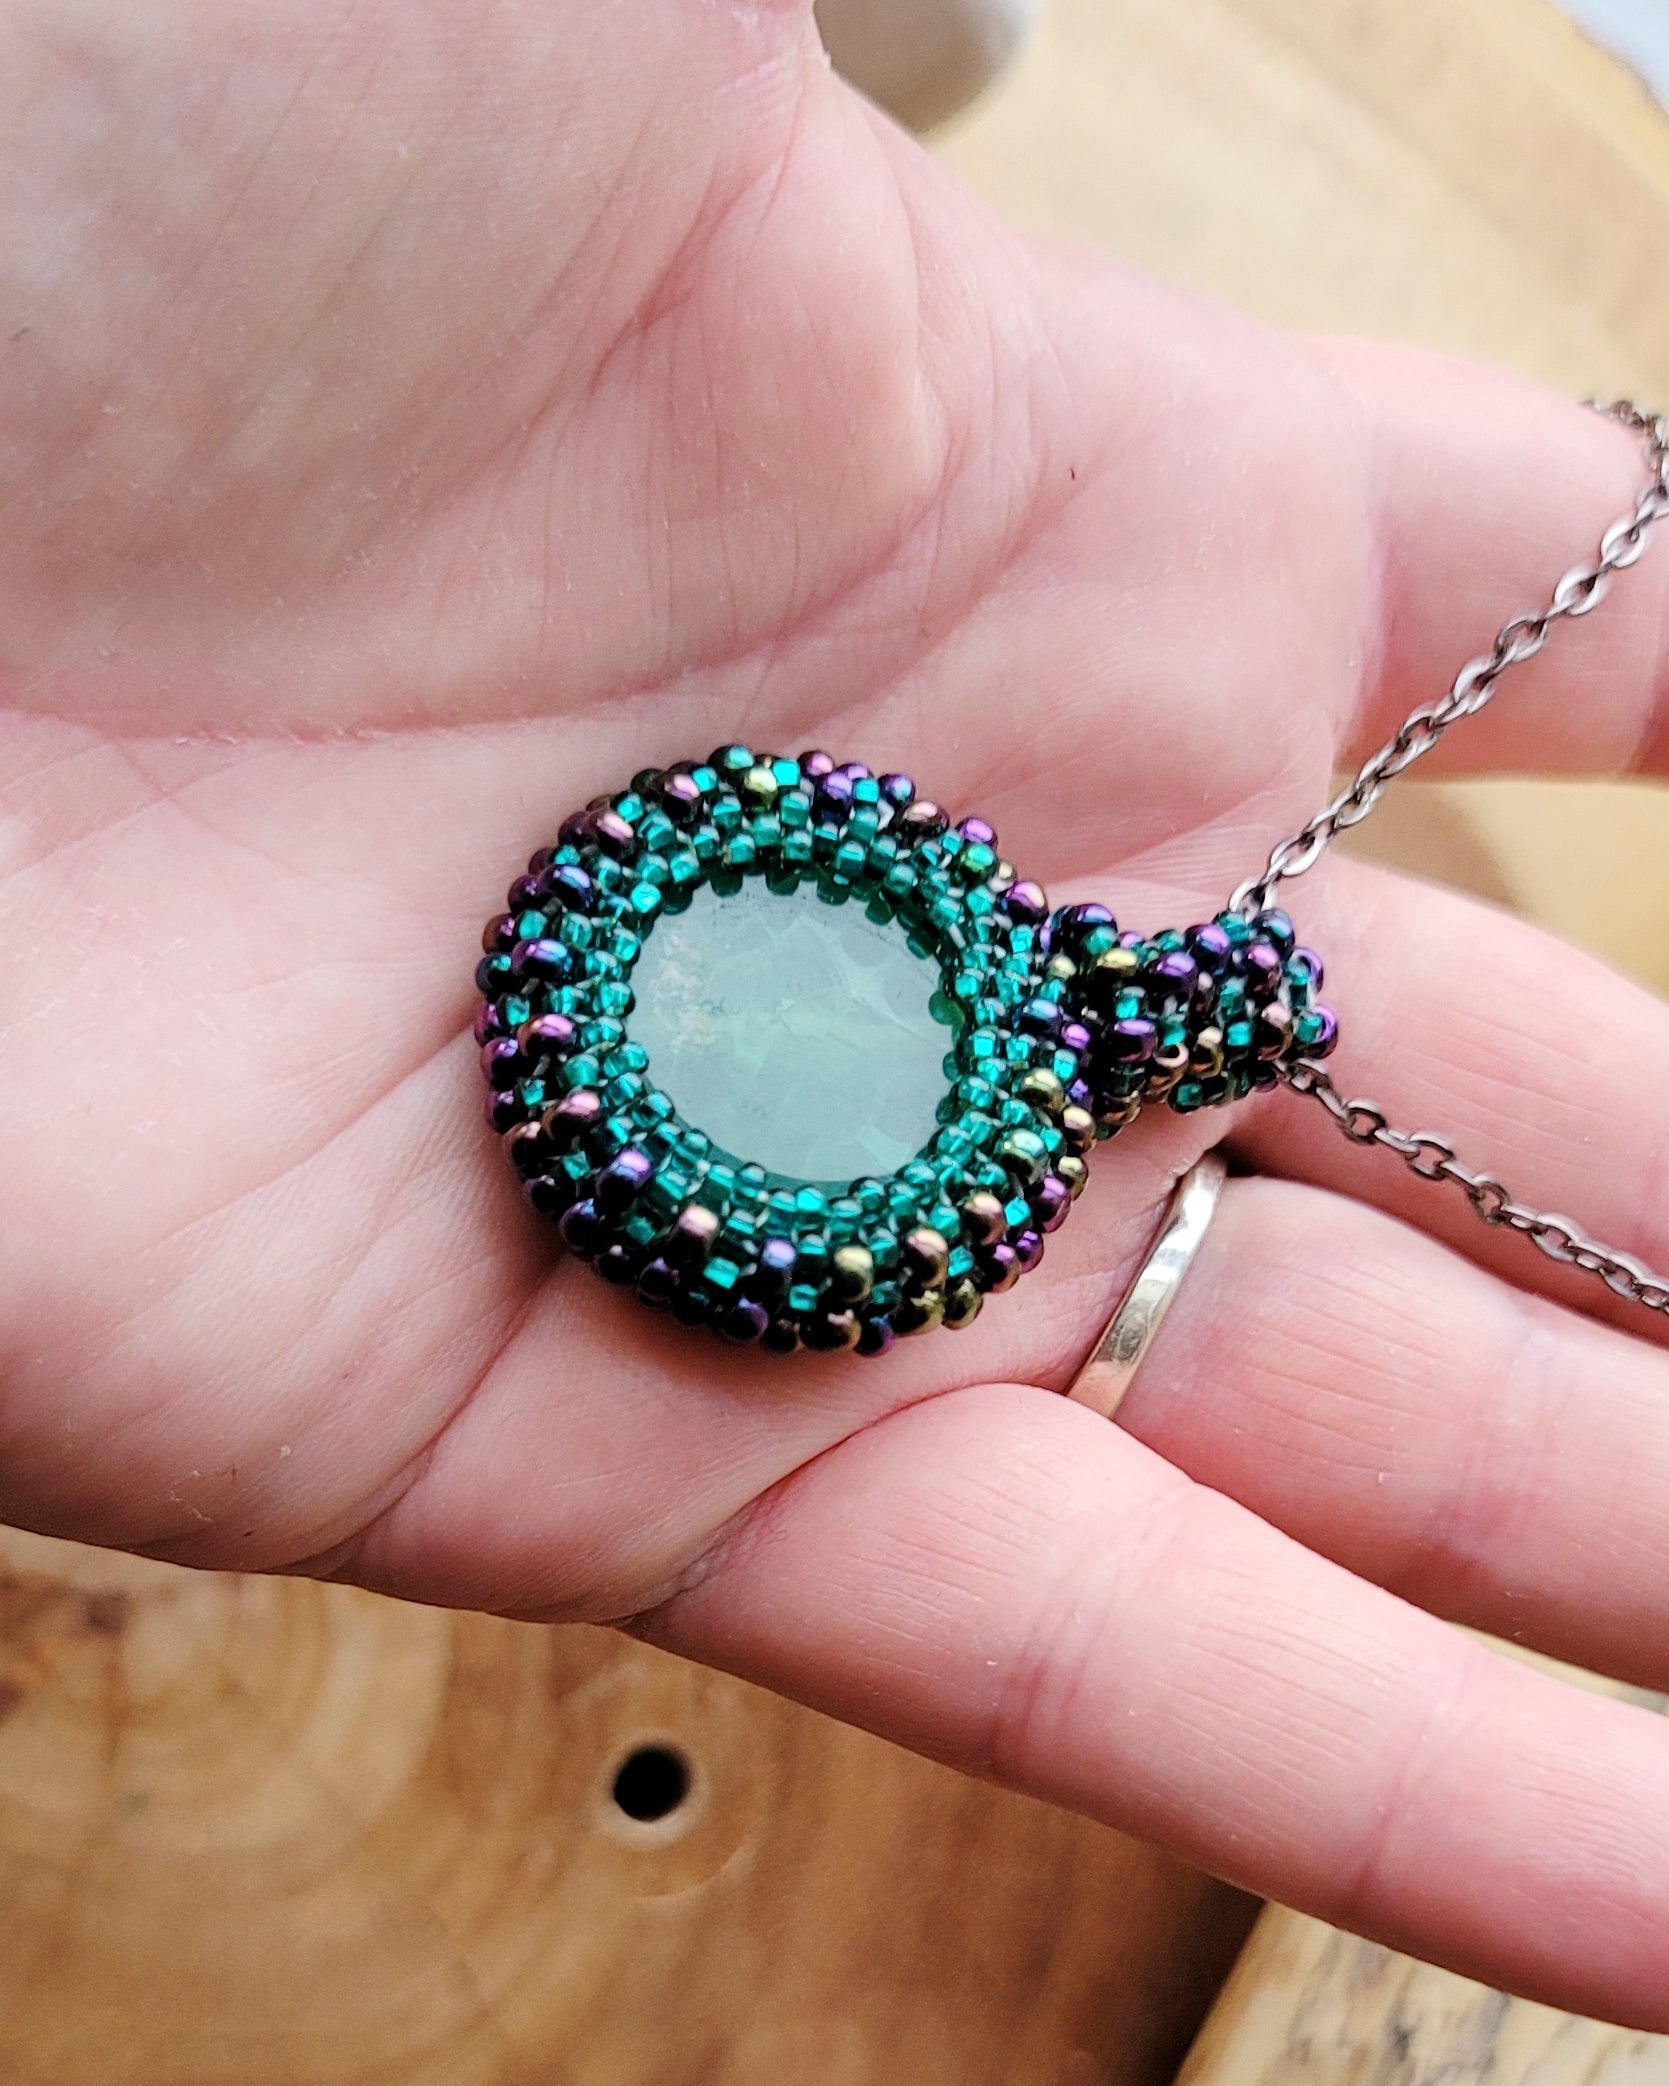 Excitement and Joy Beaded Agate Pendant, One of a kind Beaded Green Agate Pendant, metallic blue & teal green glass seed beads